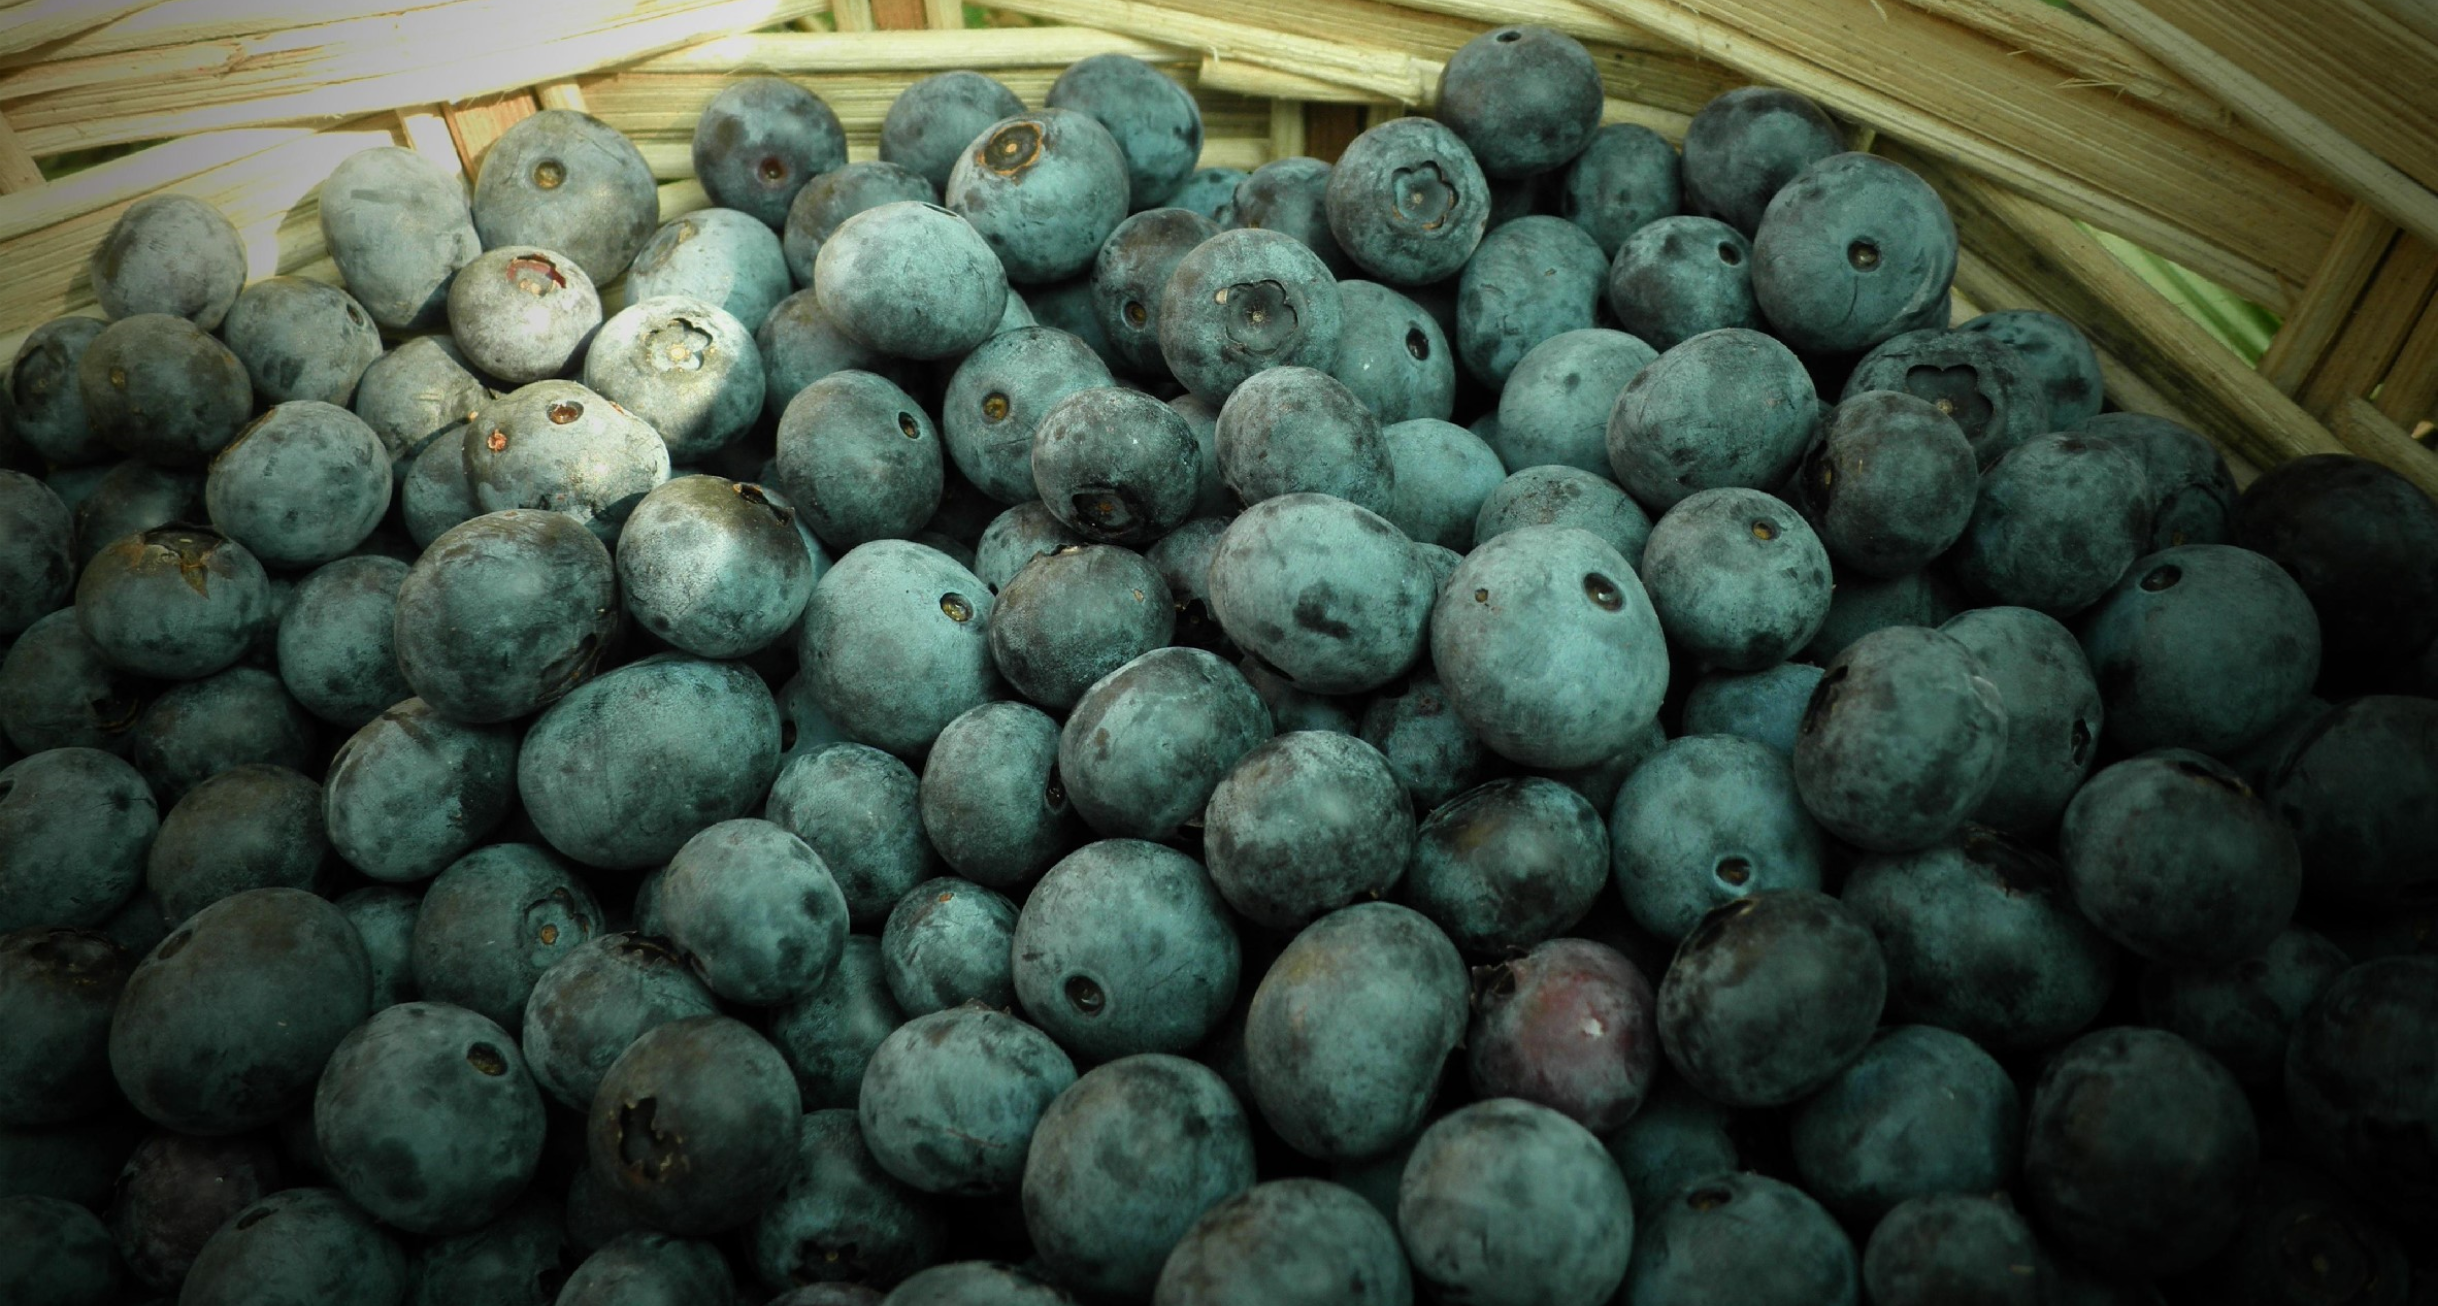 Health Facts About Blueberries